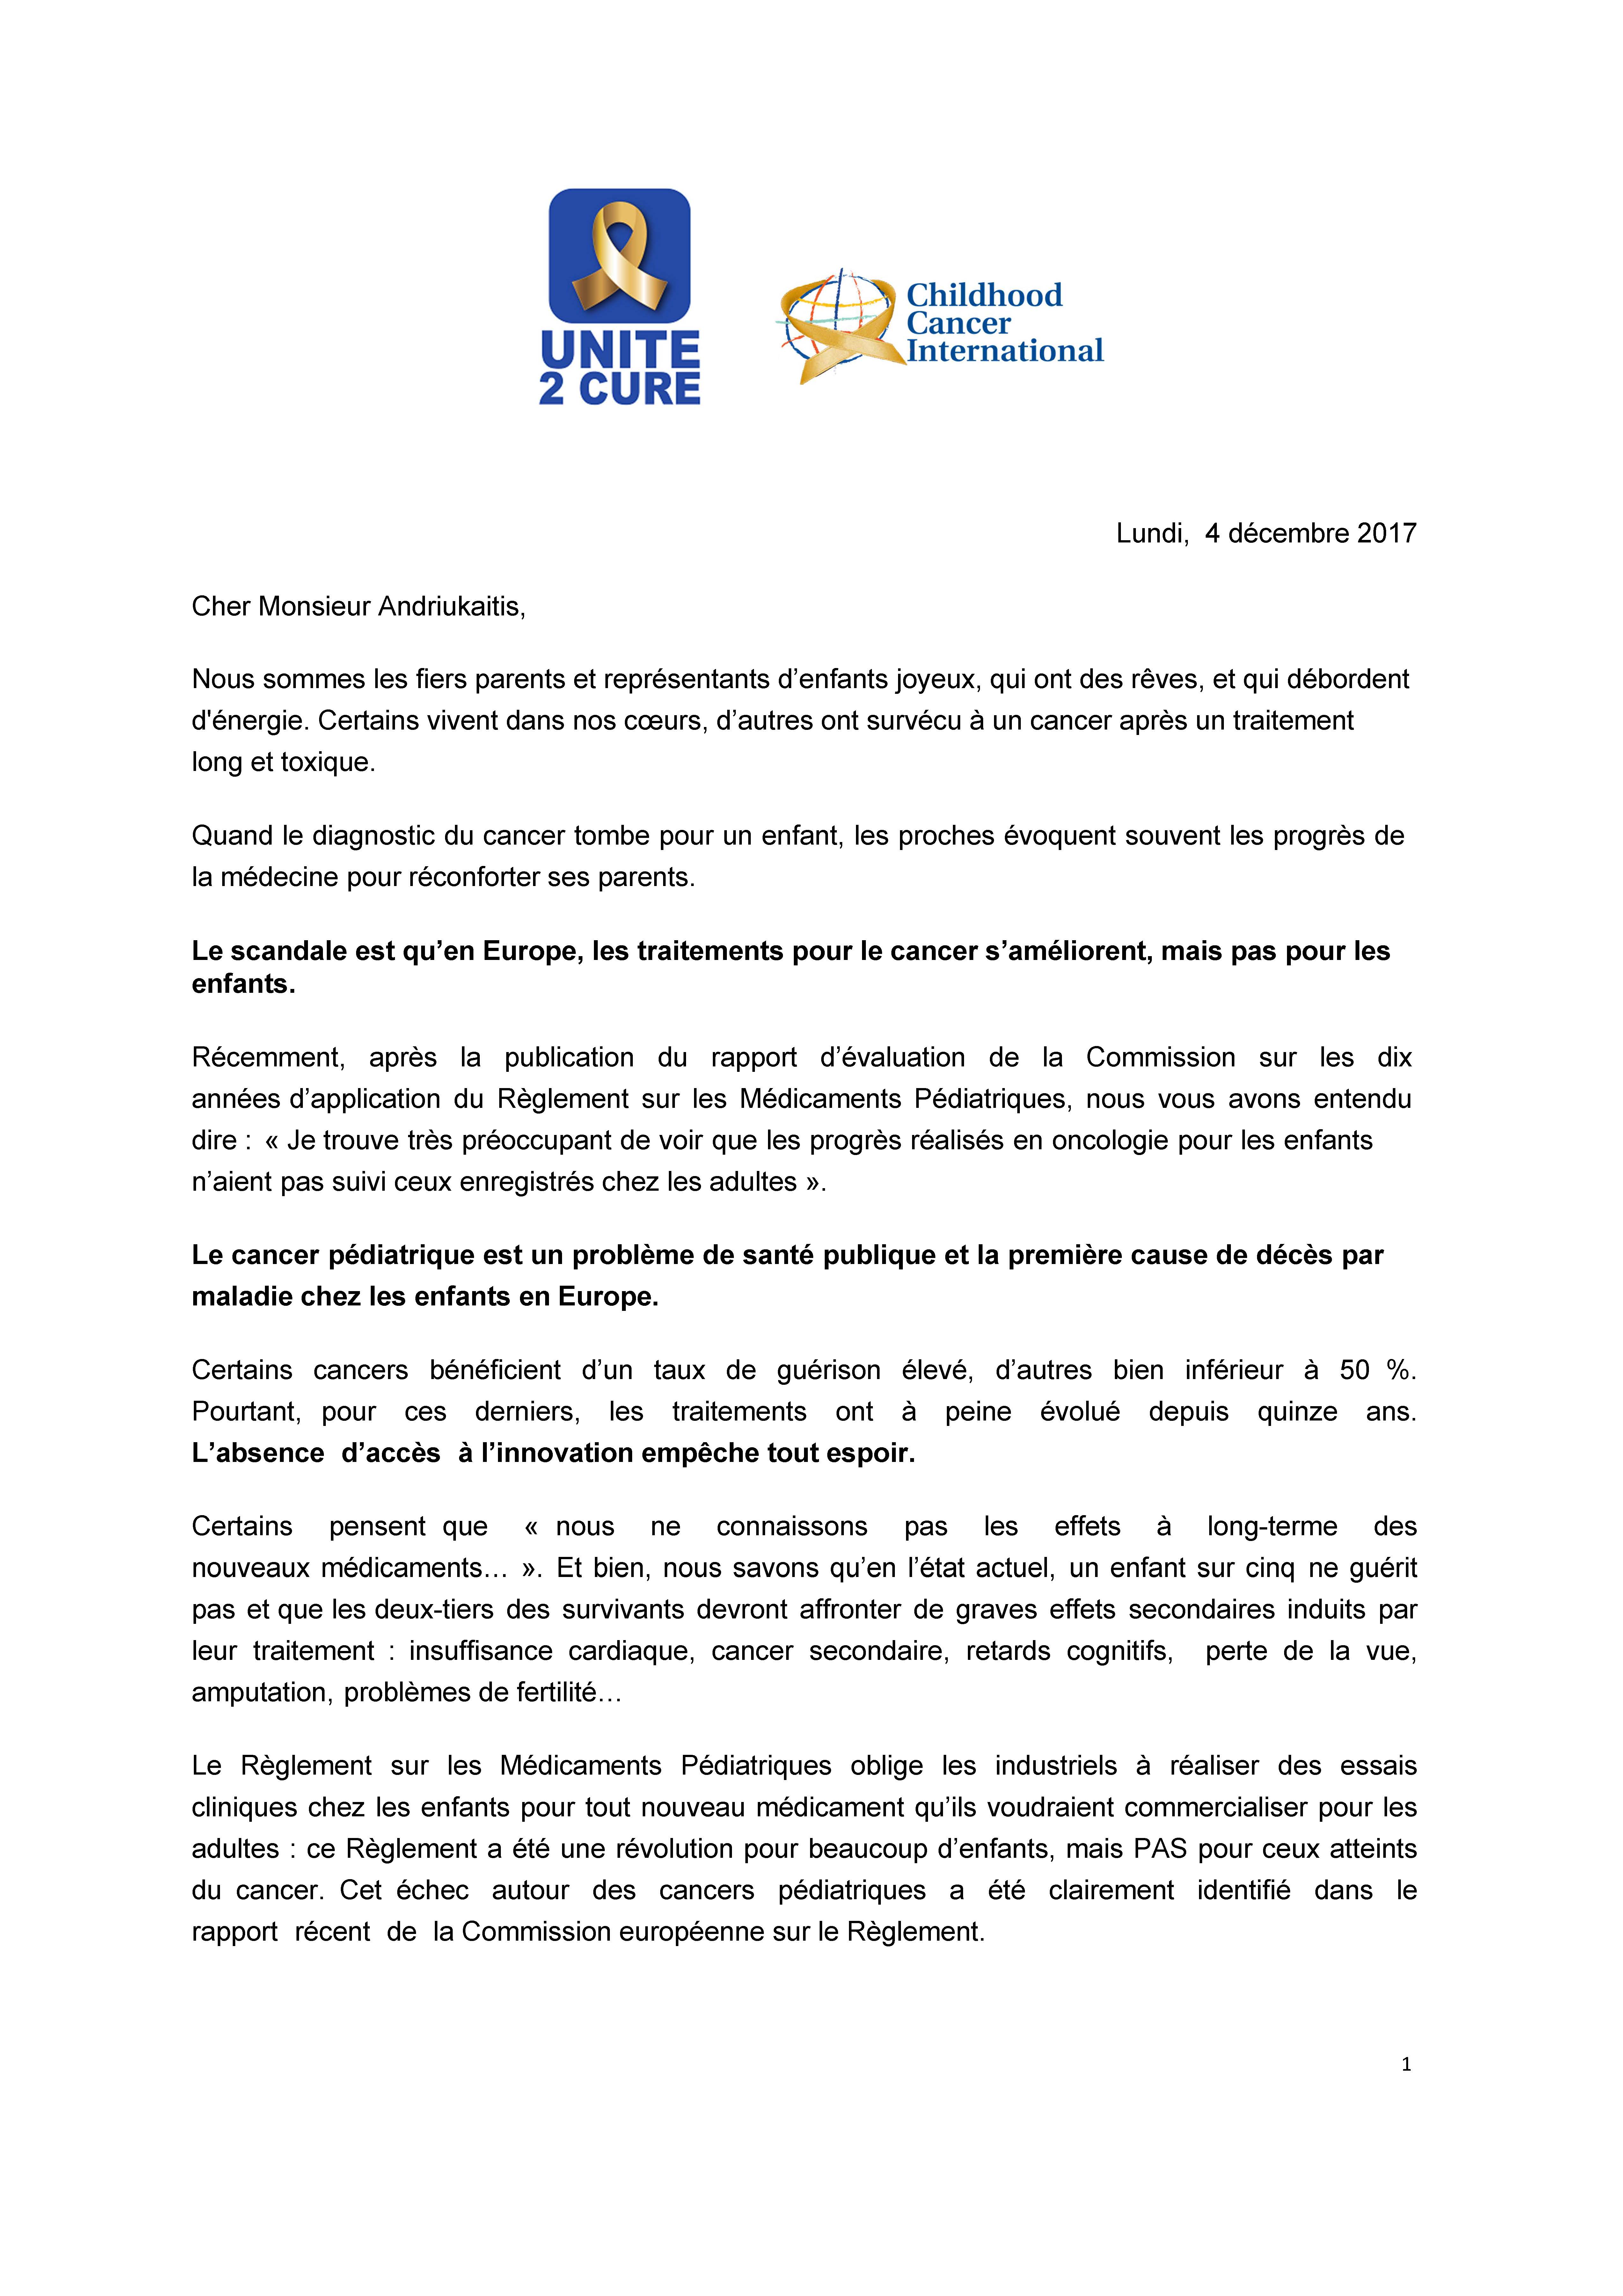 French version of the open letter wls_Page_1